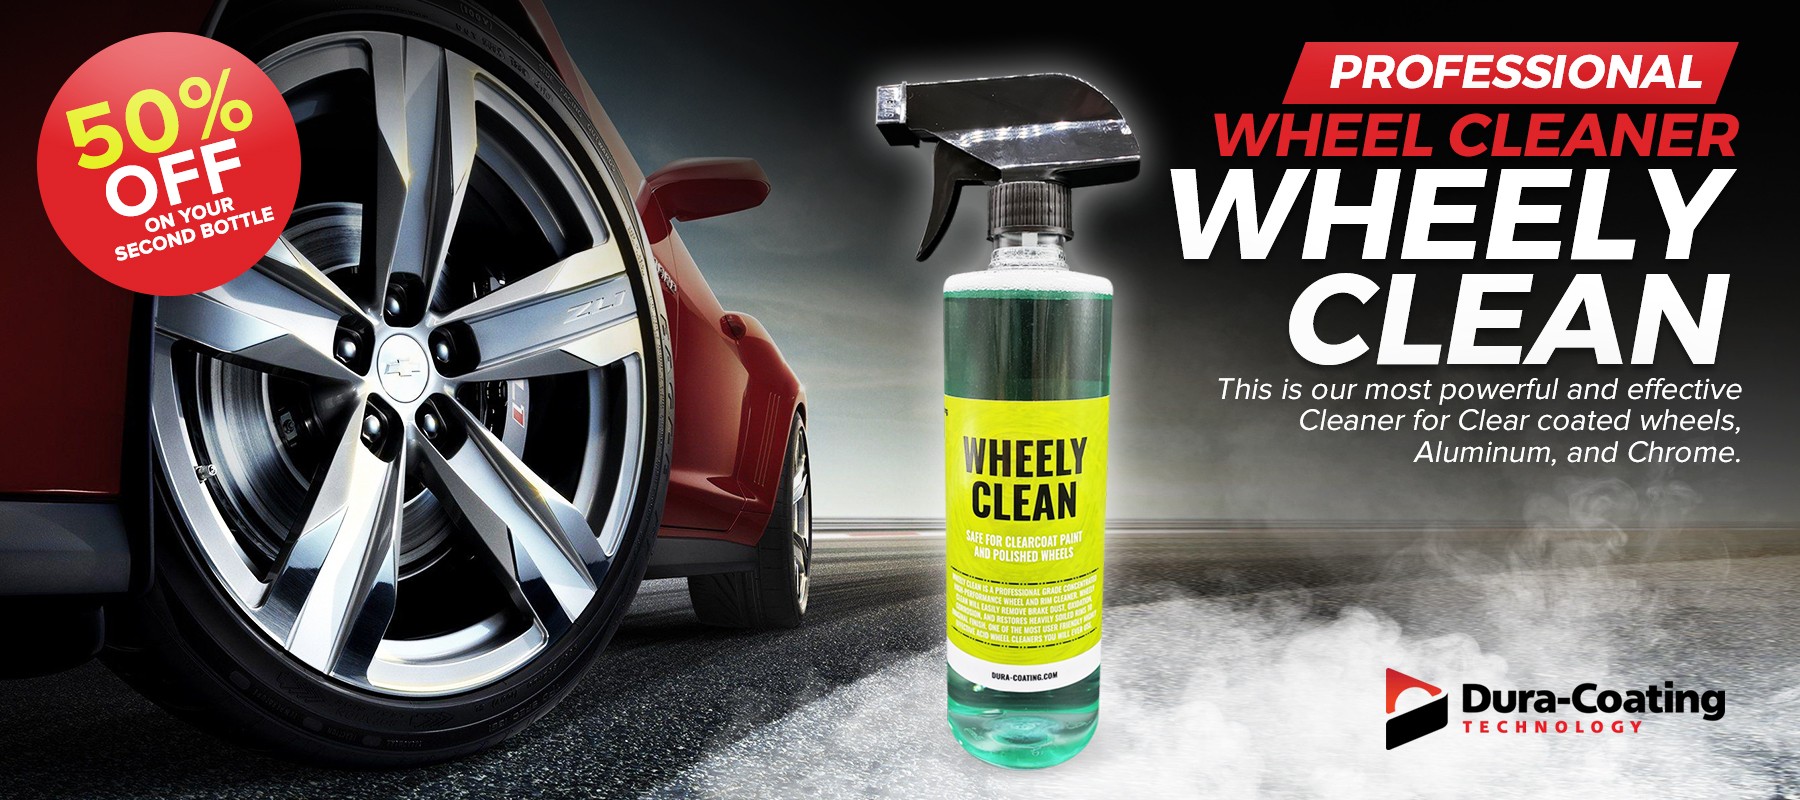 Dura-Coating Wheely Clean - Professional Wheel Cleaner | Highly Effective  for Chrome, Aluminum, and Clear-Coated Wheels | 1 Gallon Ready-to-Use Wheel